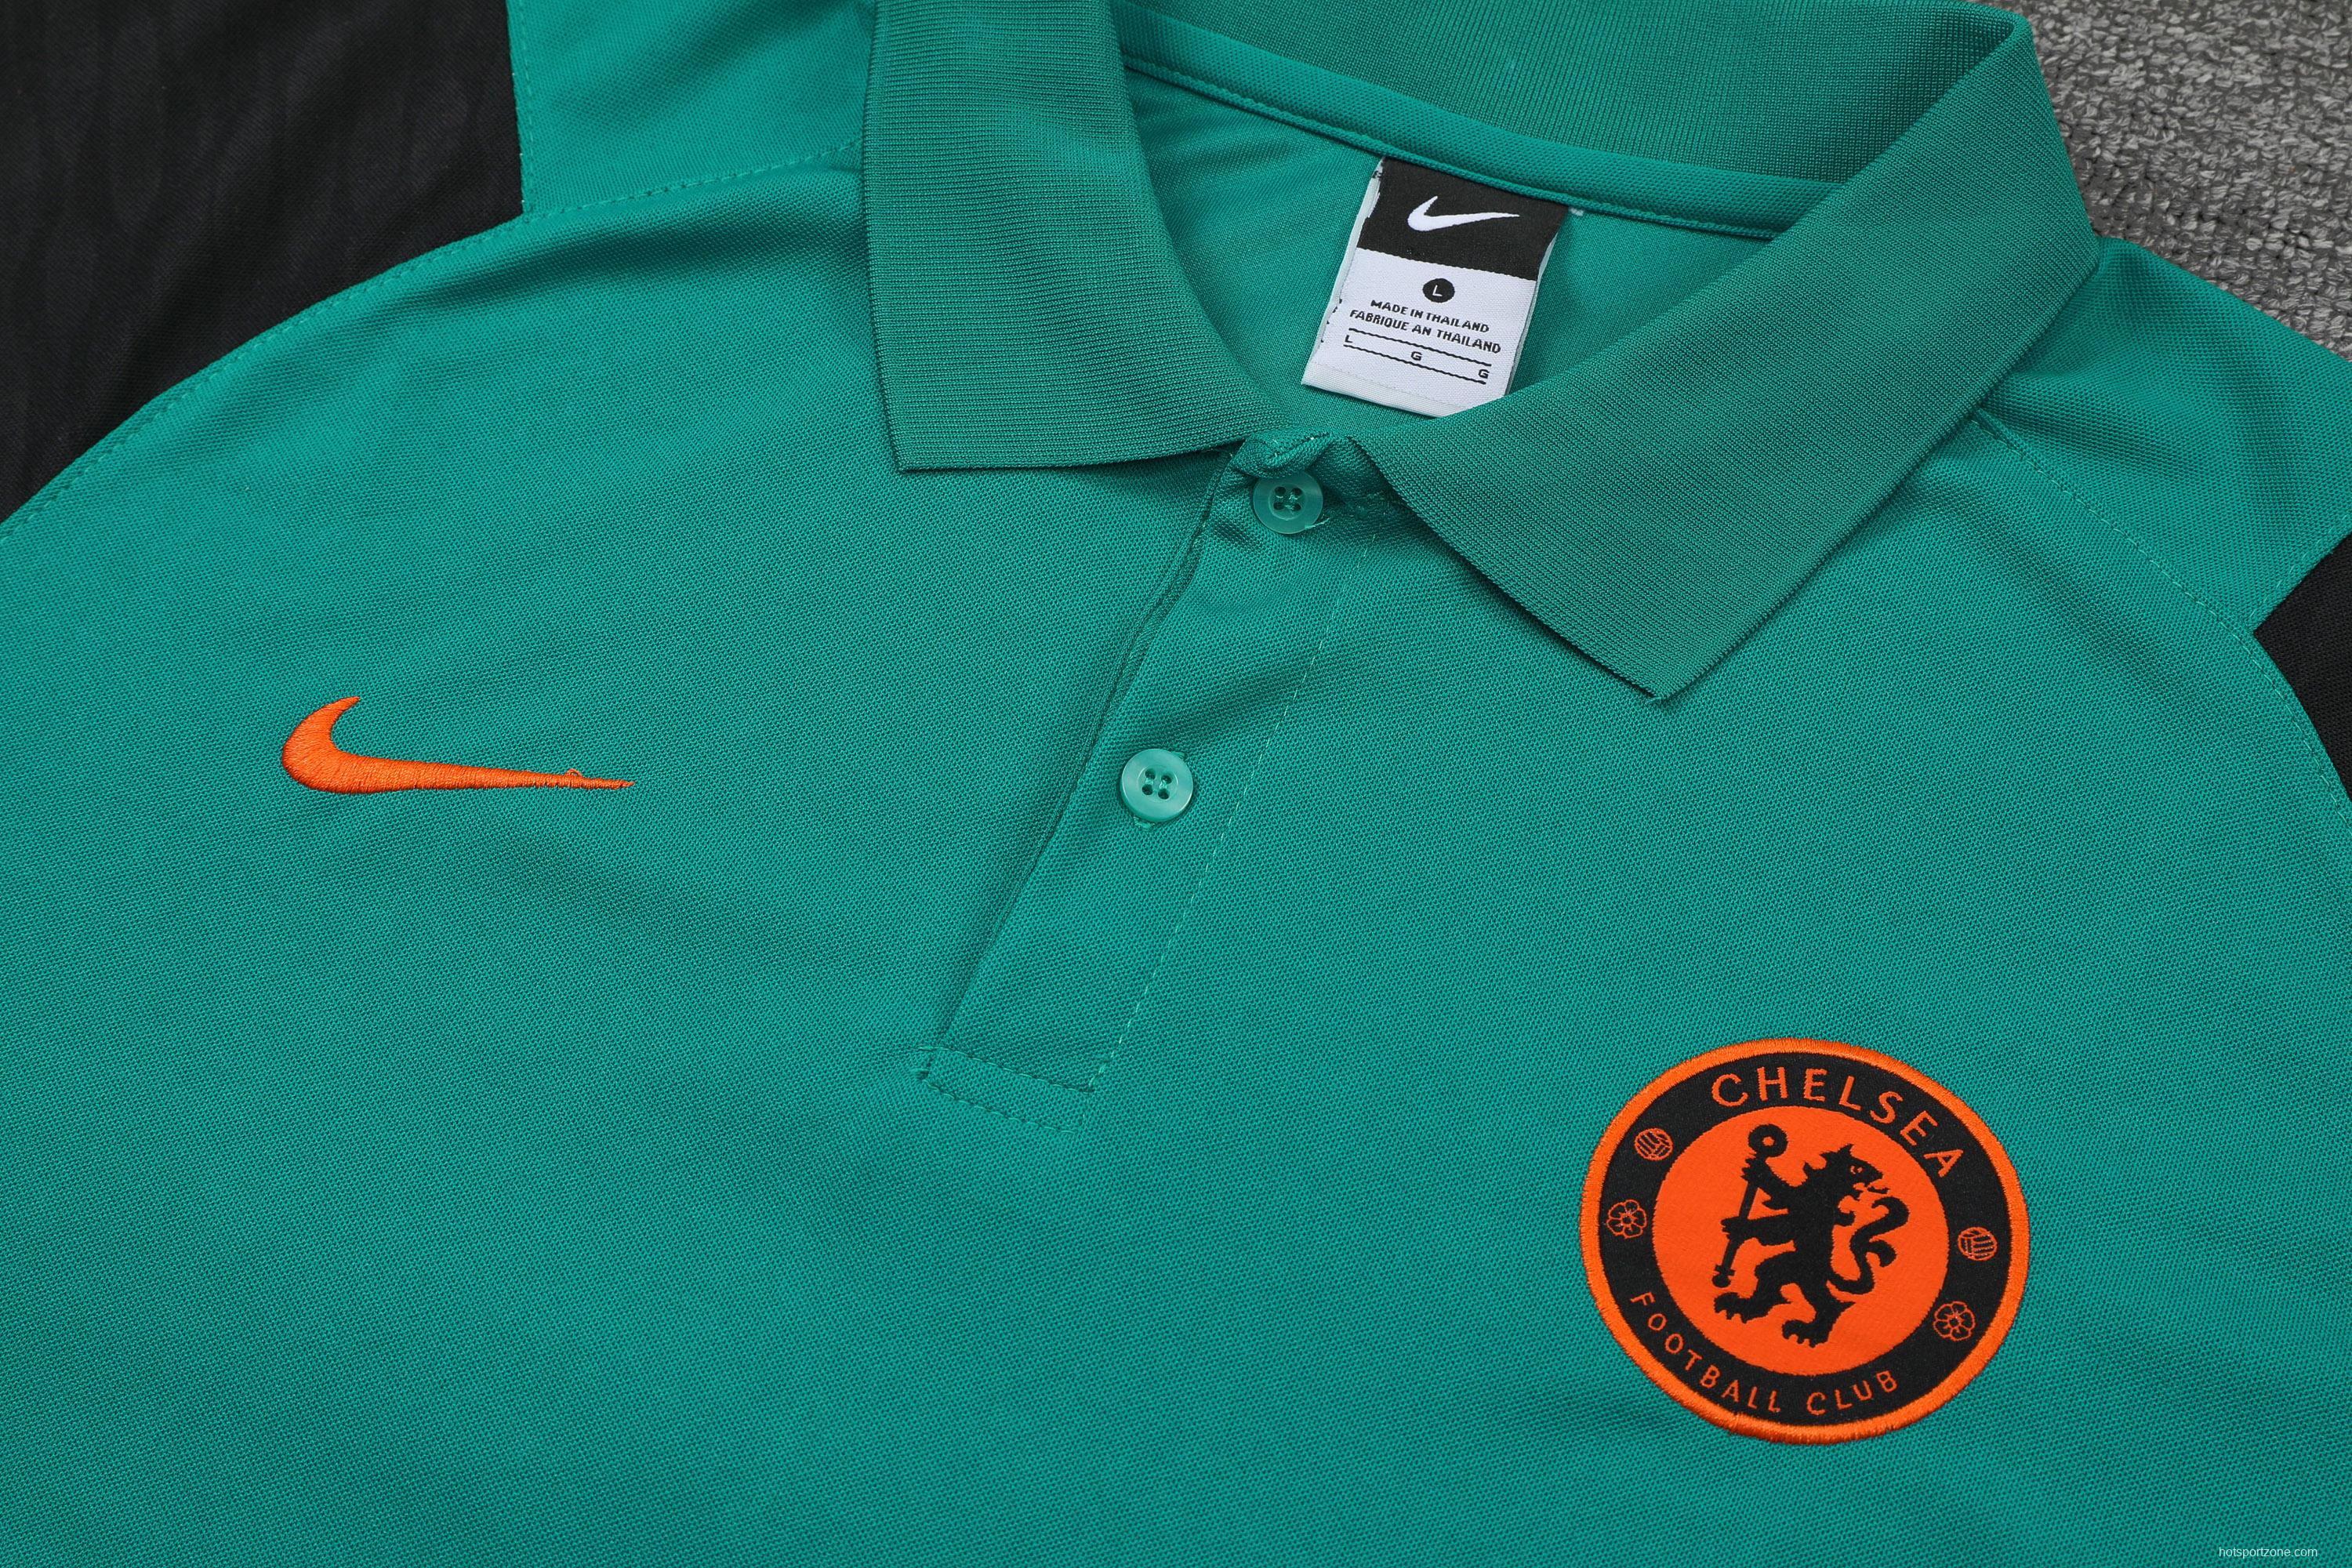 Chelsea POLO kit Green (not supported to be sold separately)